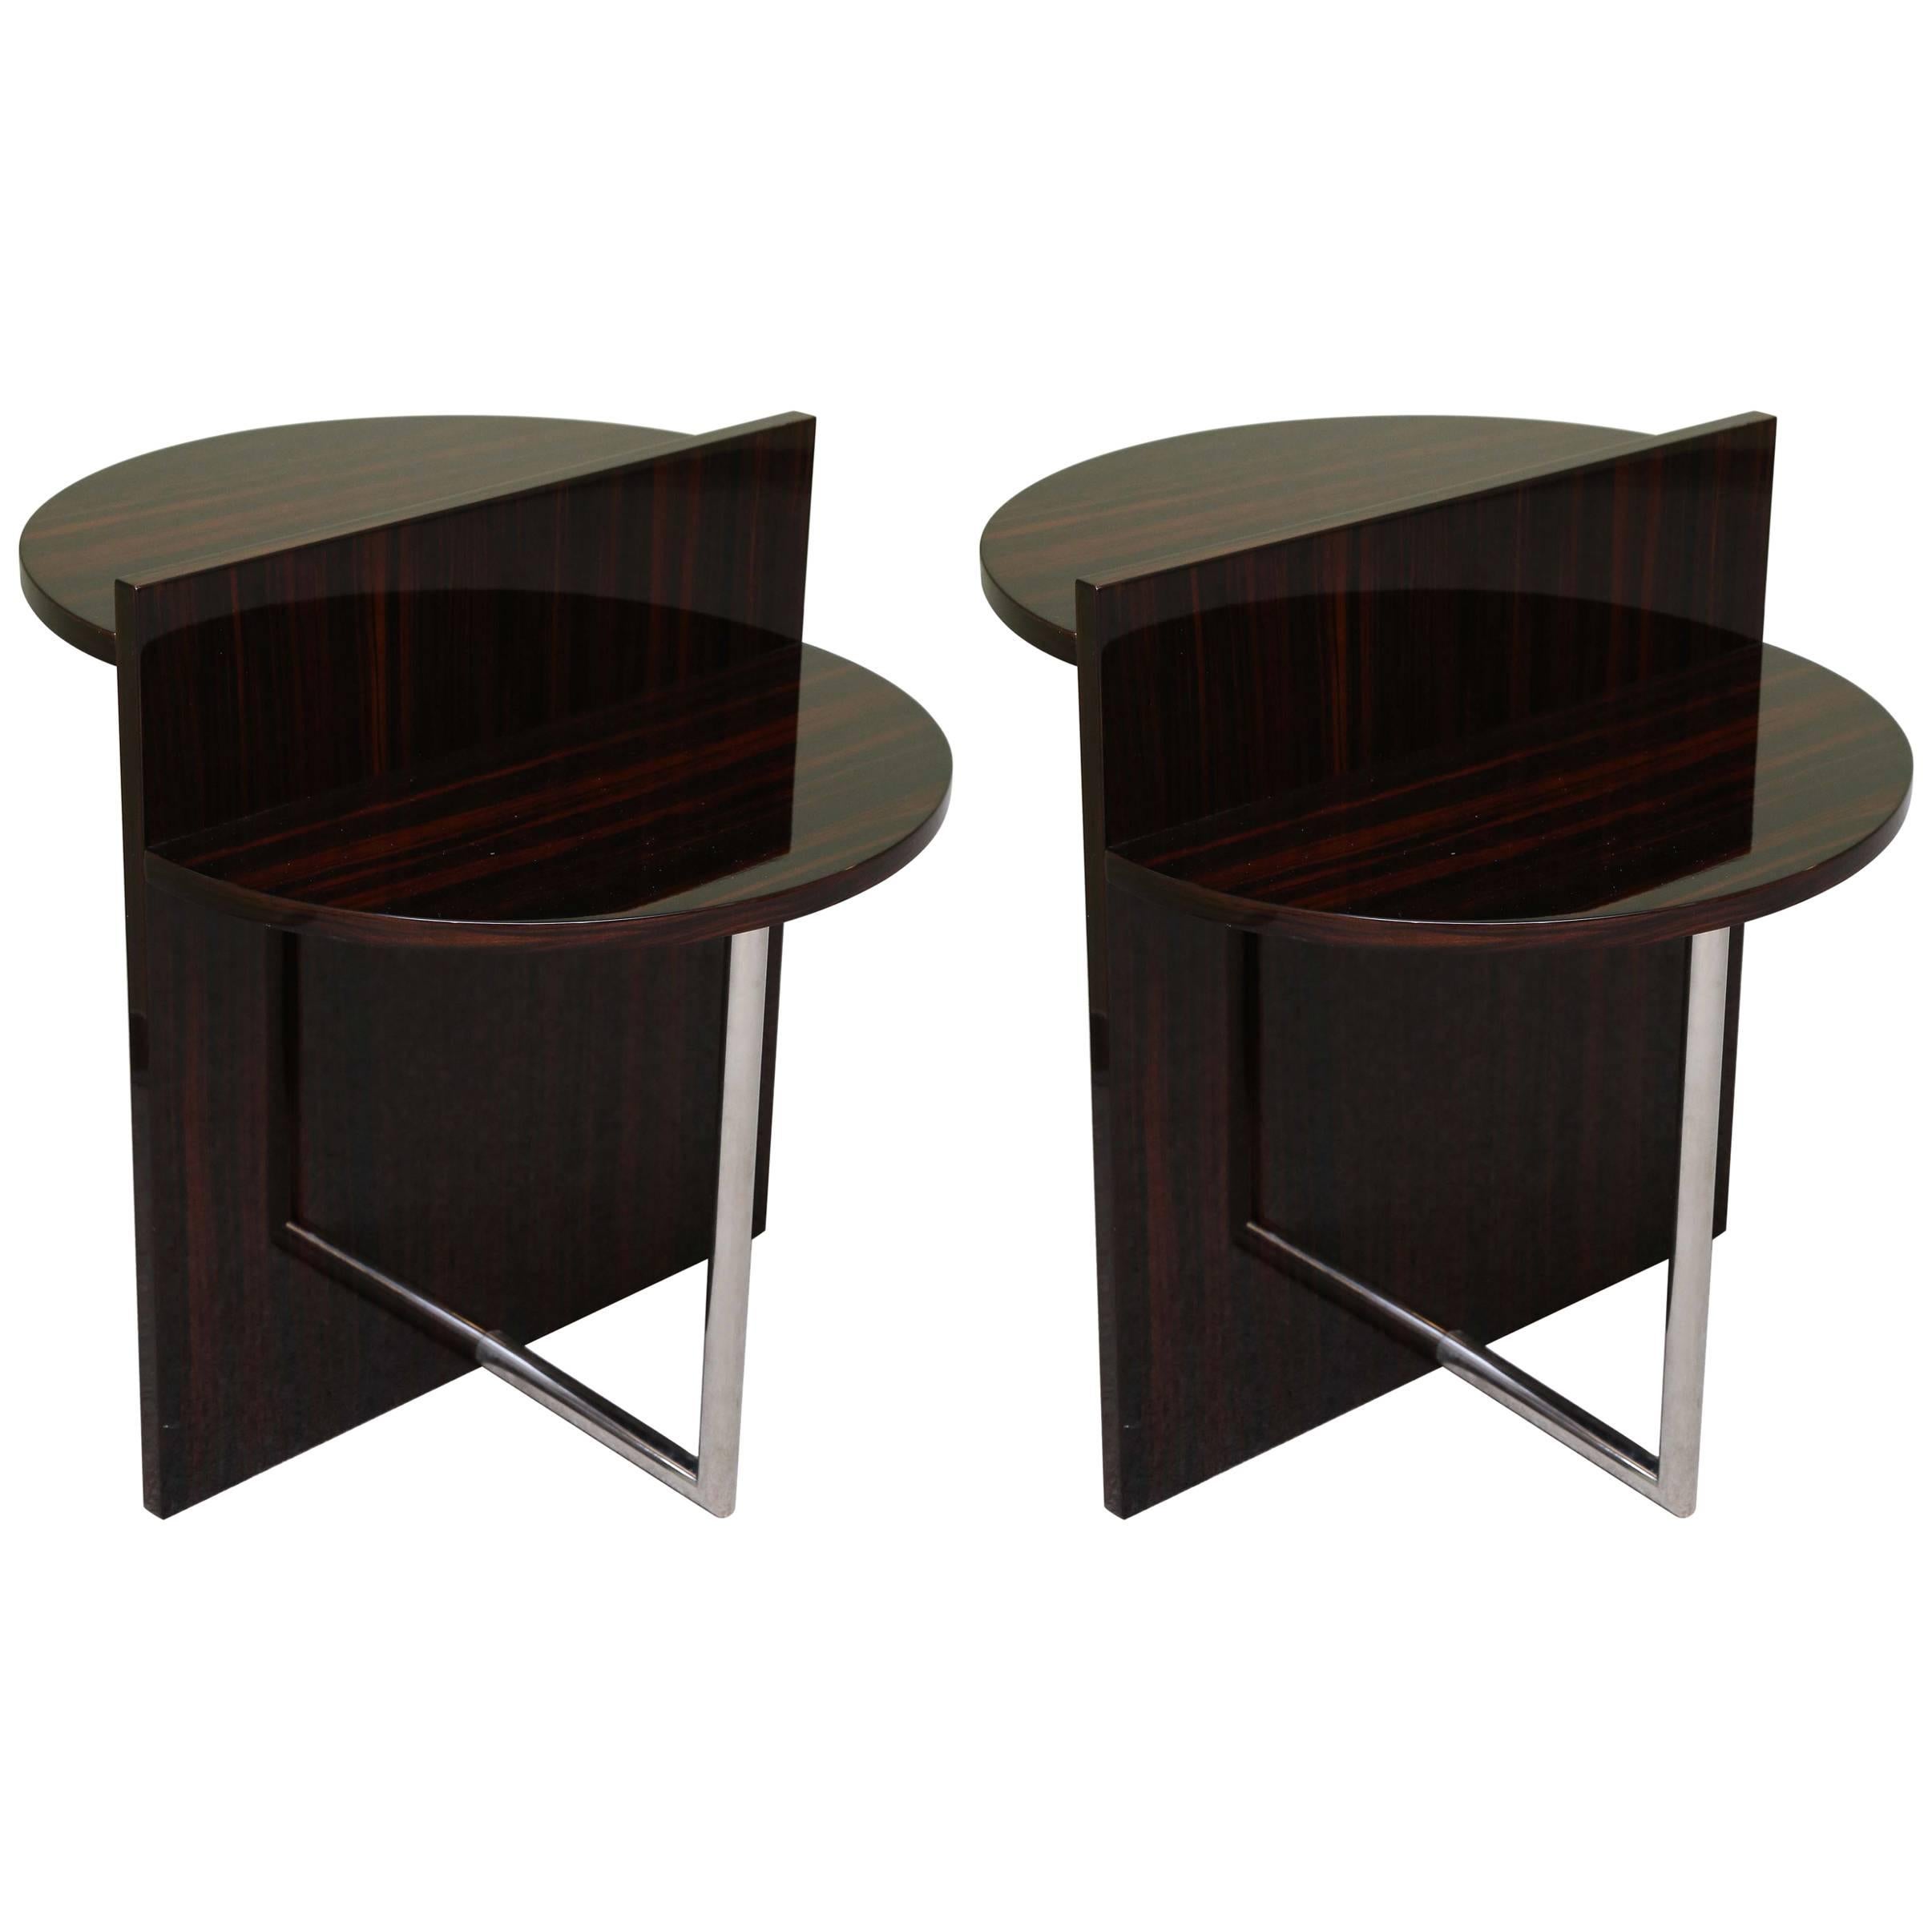 Pair of French Art Deco Walnut and Chrome Side Tables